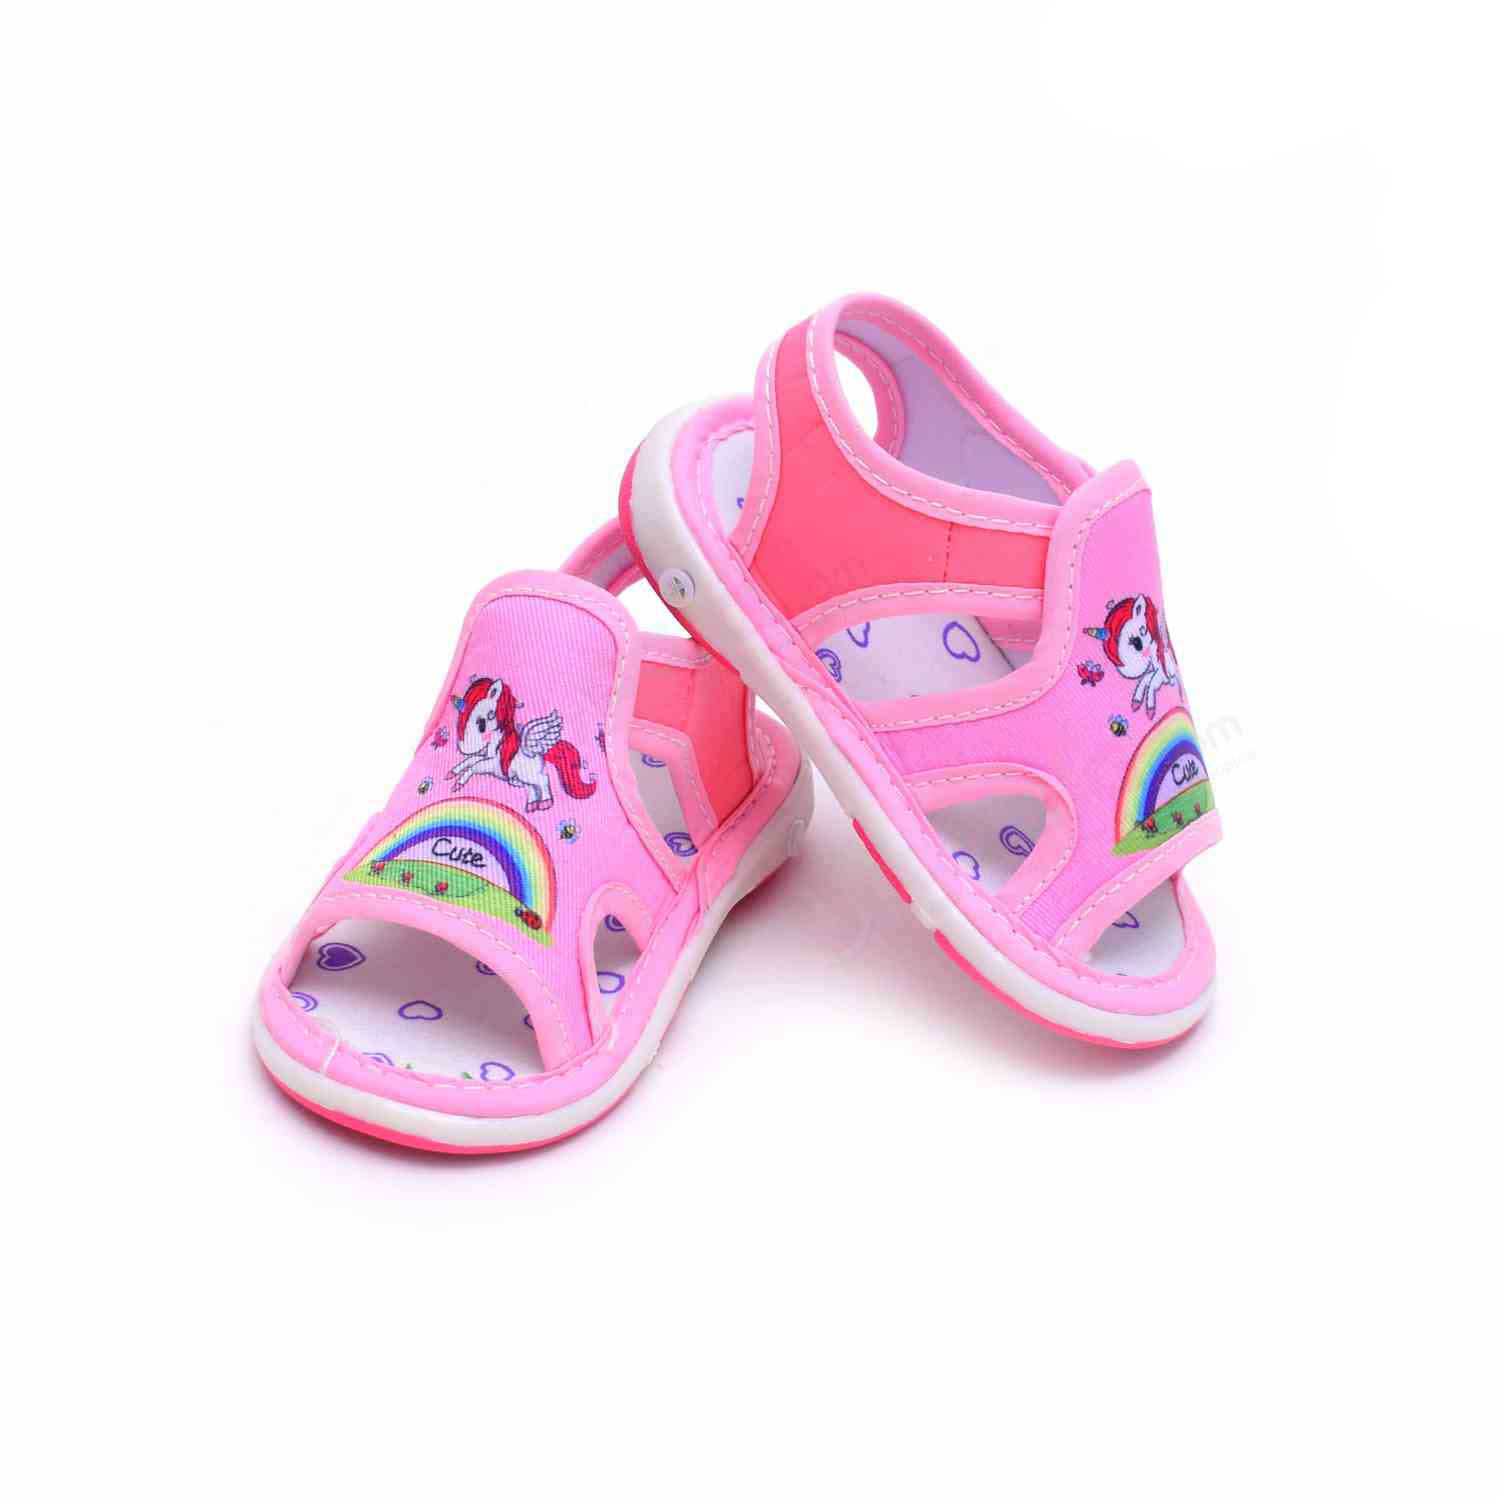 Kids Collection Lets Go Chu Chu Sandals with Cute Unicorn Print - Pink